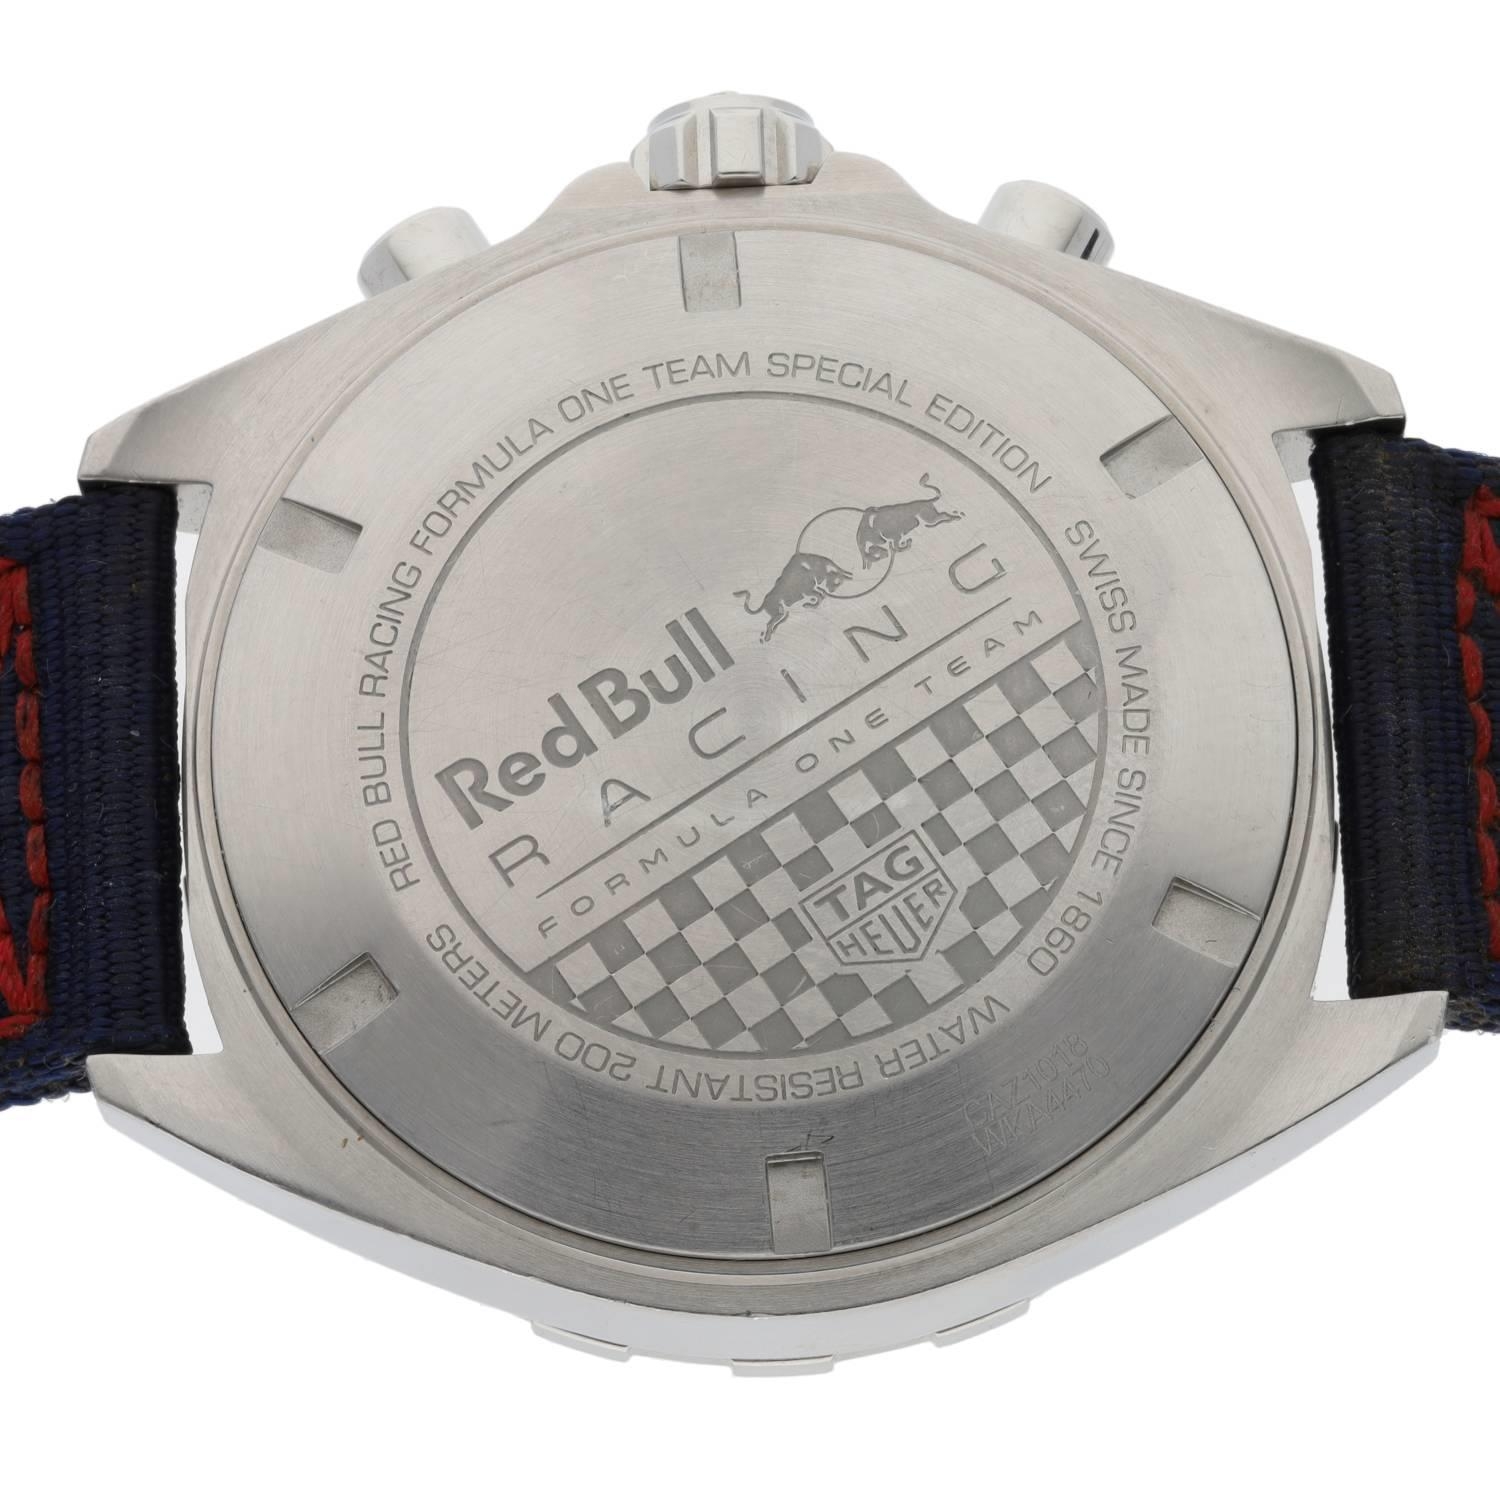 Tag Heuer Formula 1 Red Bull Racing Formula One Team Special Edition Chronograph stainless steel - Image 2 of 3